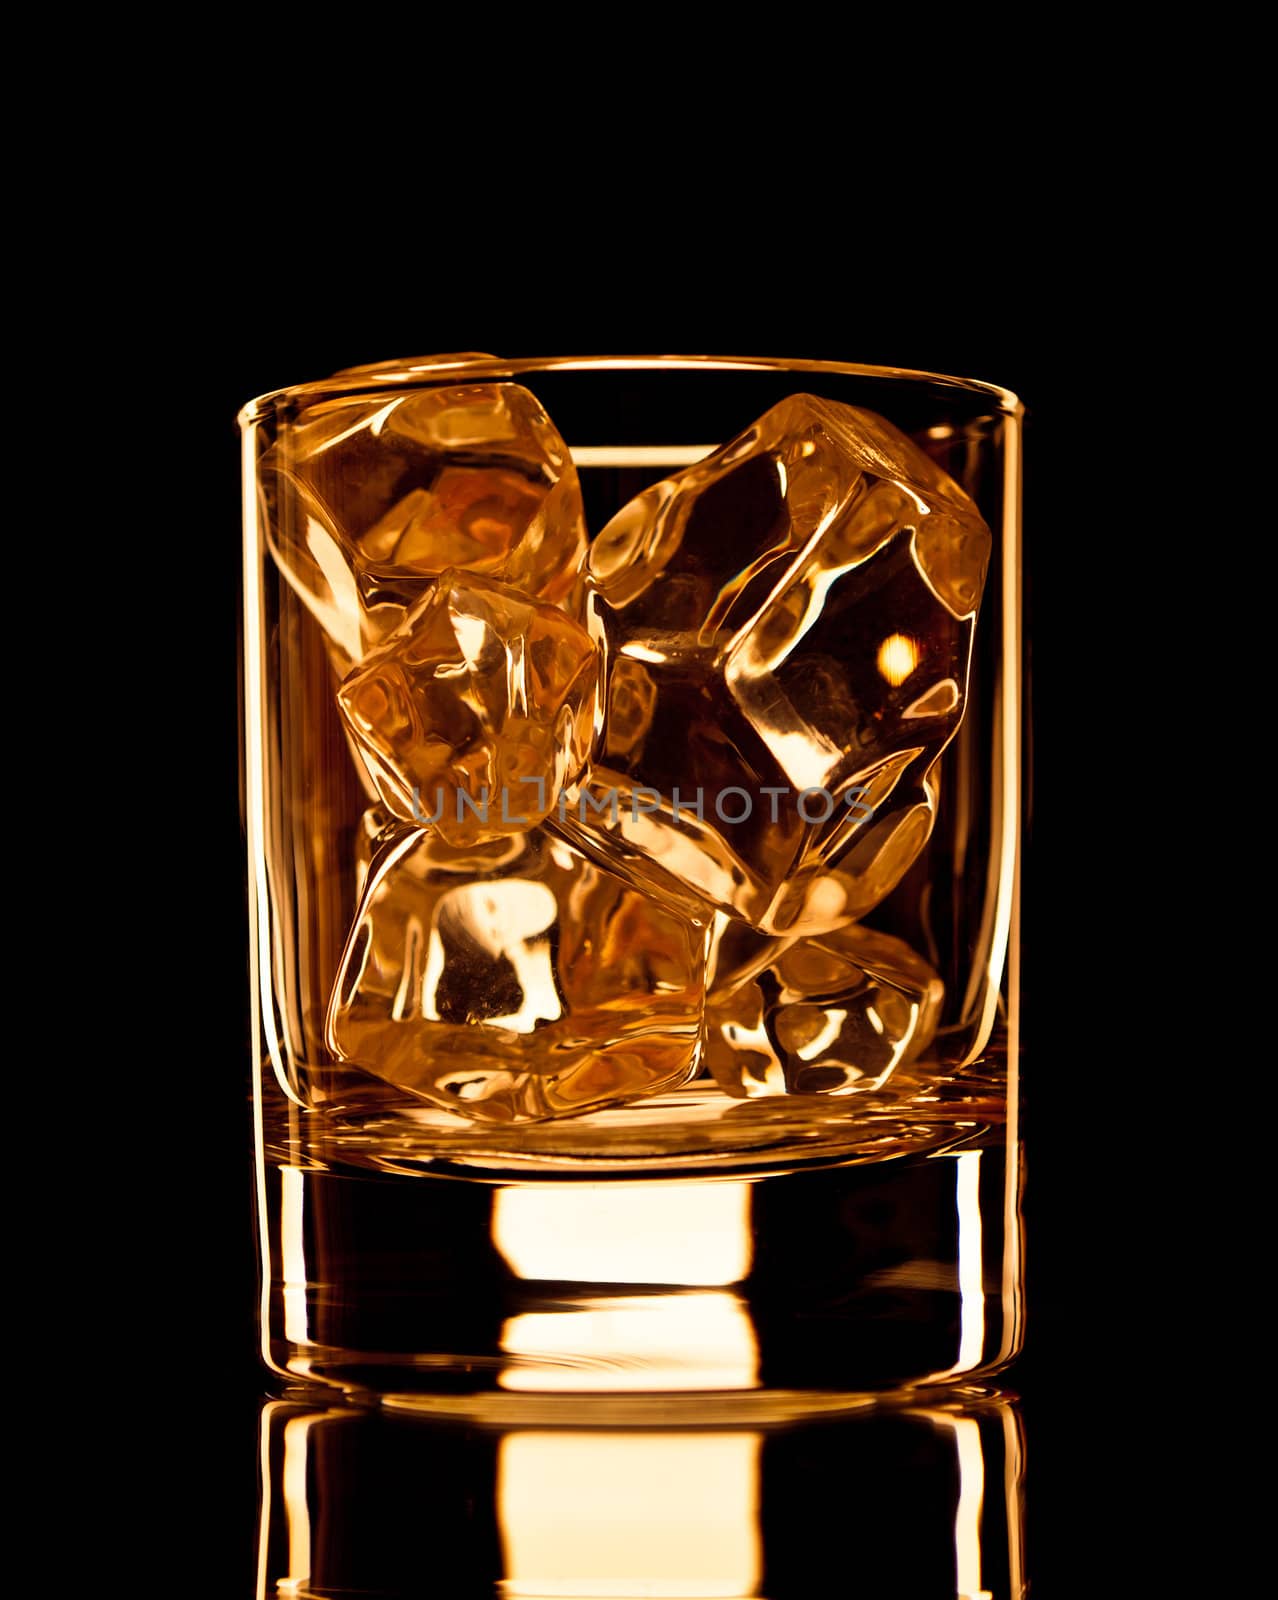 Empty whiskey glass with ice cubes on black background